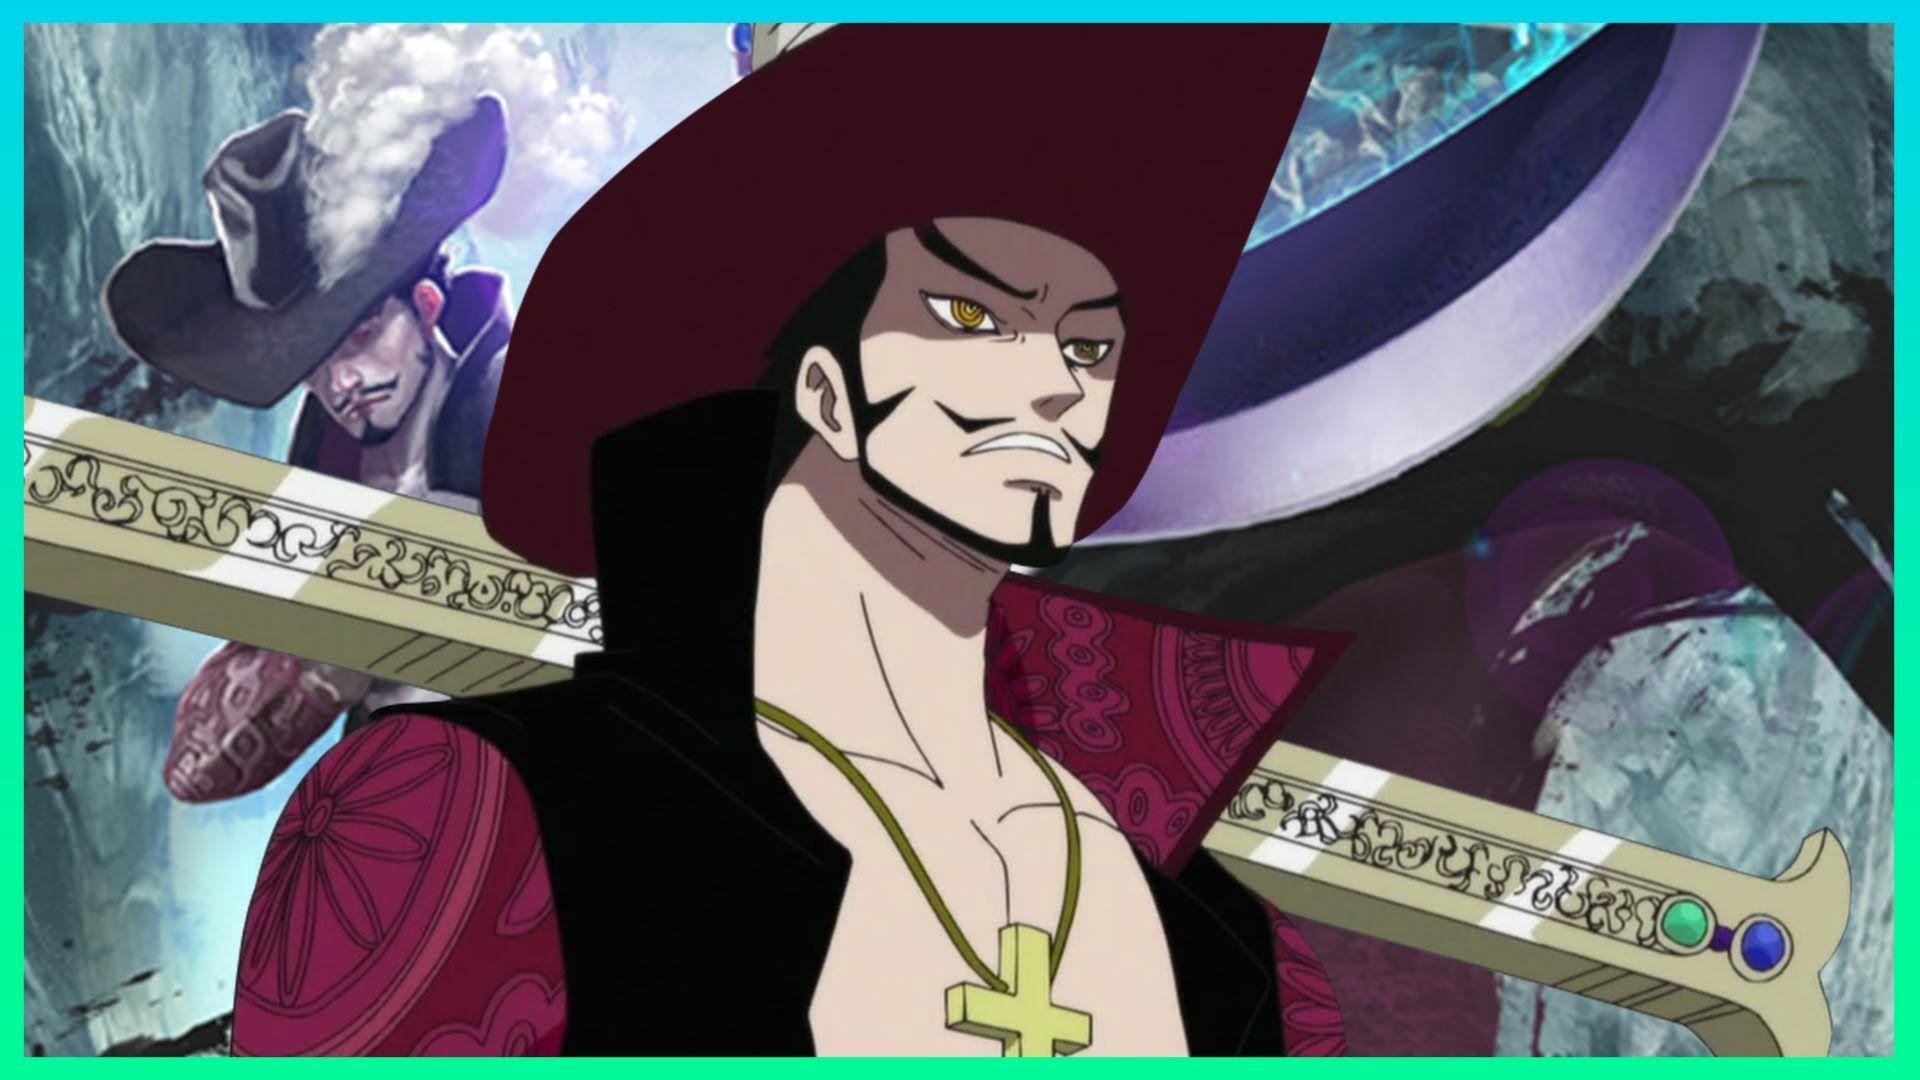 Mihawk's Powers? Haki and Cursed Blade or Devil Fruit? One Piece